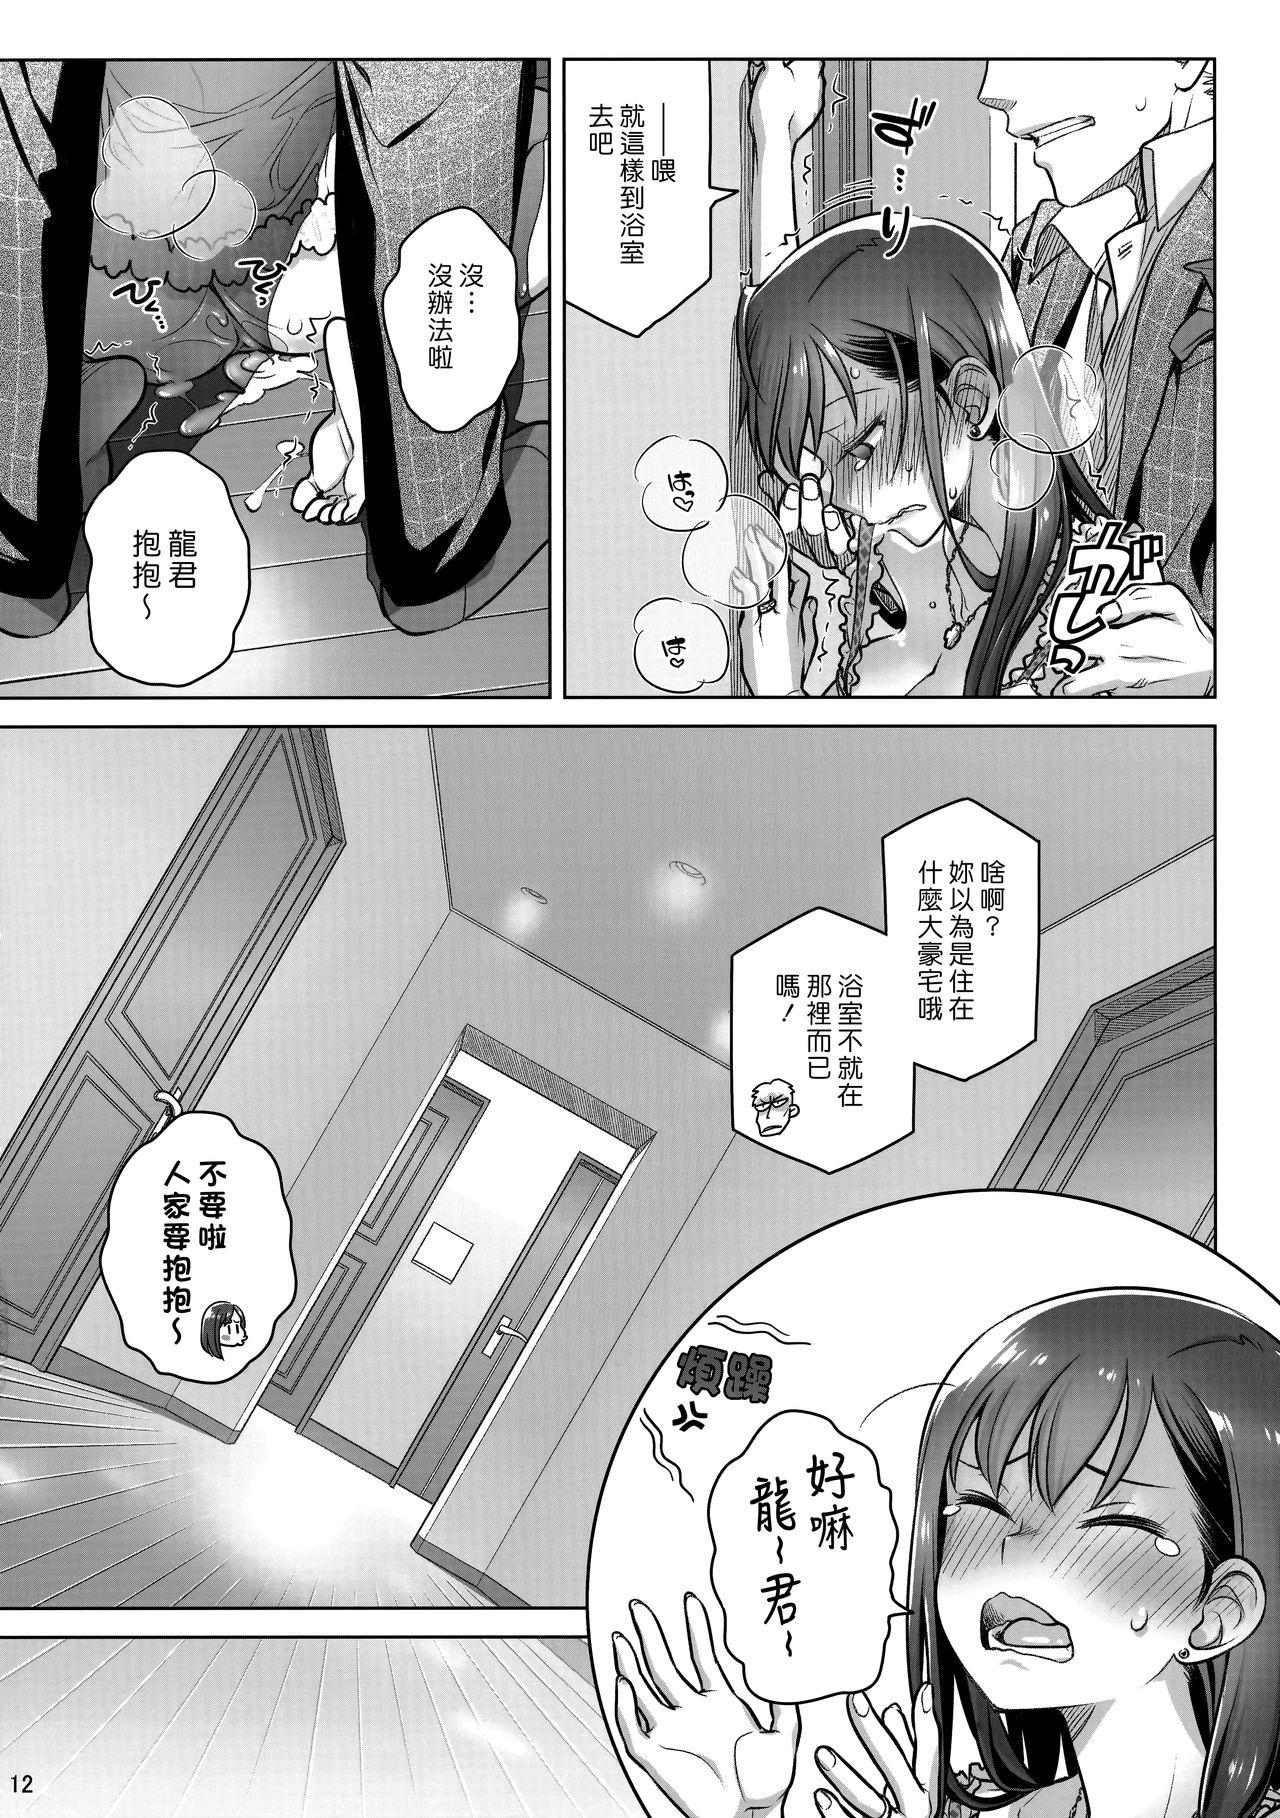 Dirty Talk Stay by MeㆍBangaihen - Original Play - Page 10